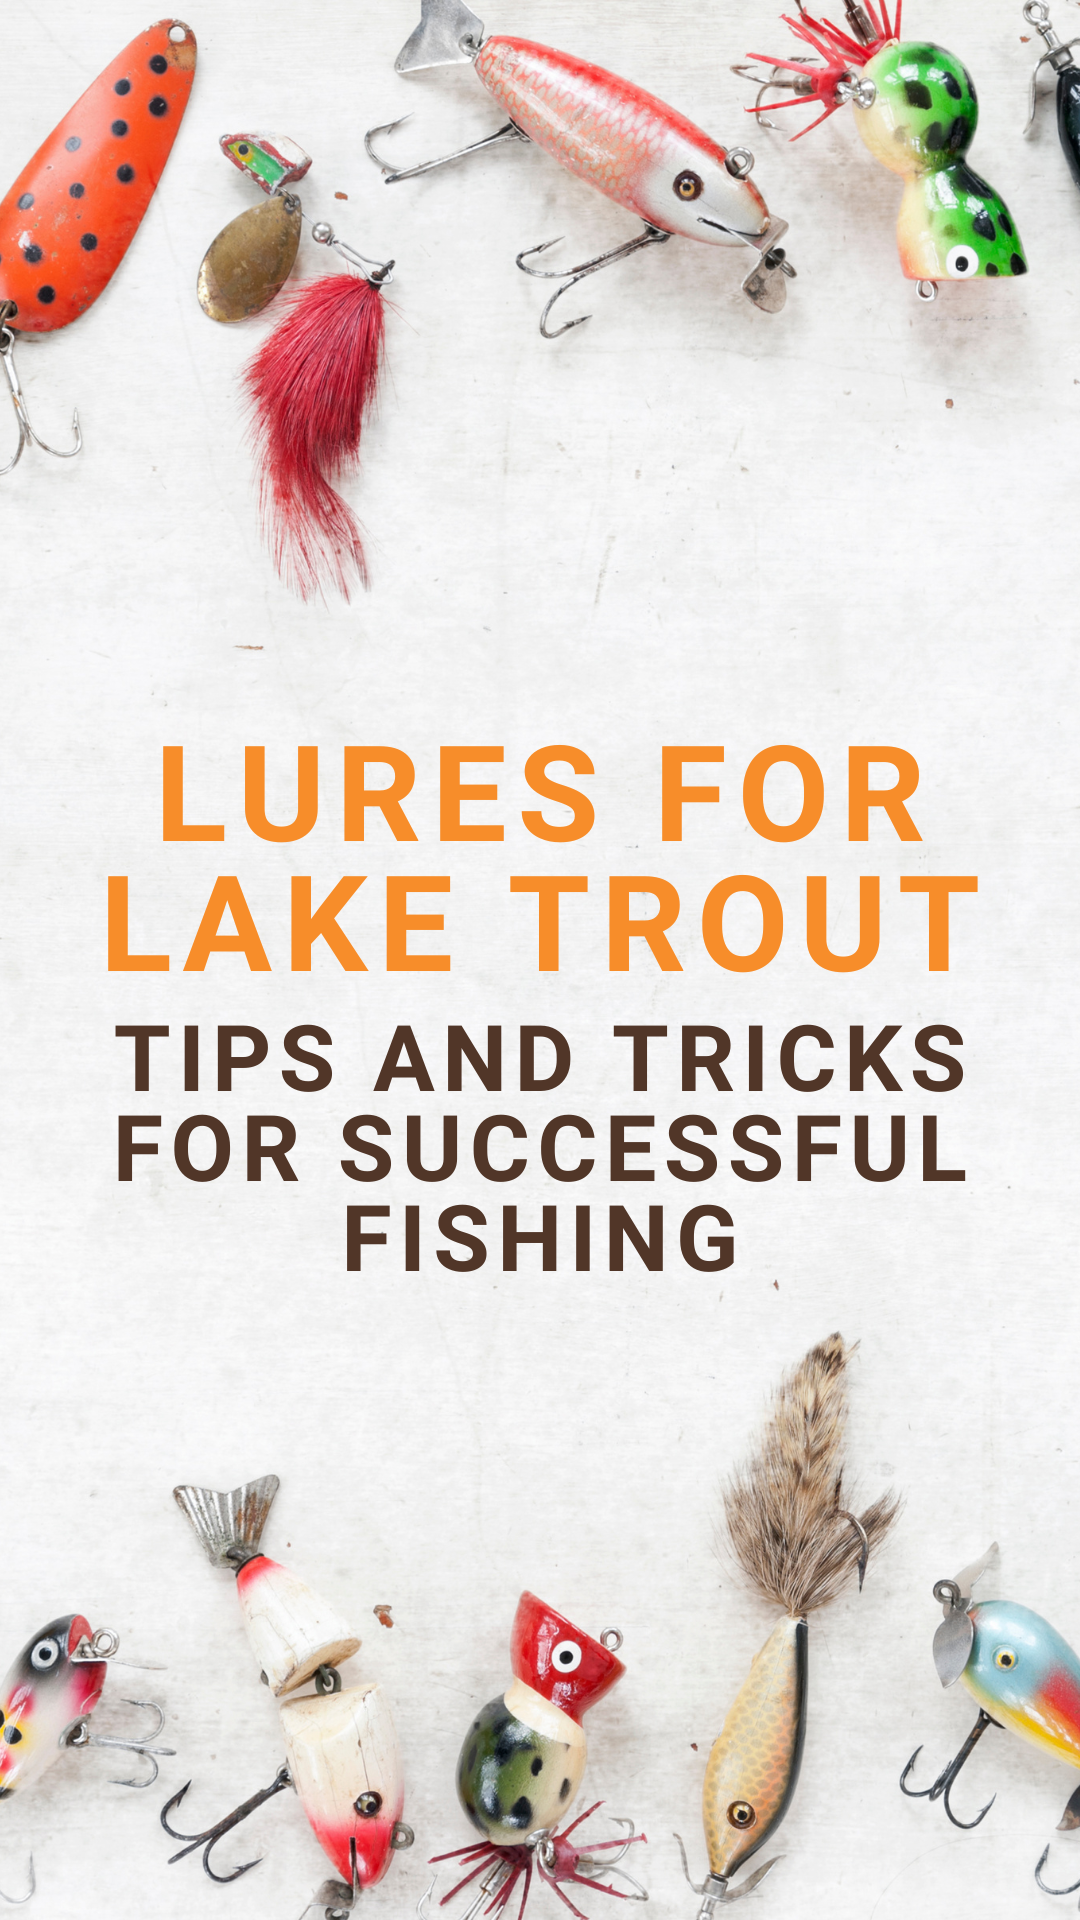 Lures for Lake Trout: Tips and Tricks for Successful Fishing